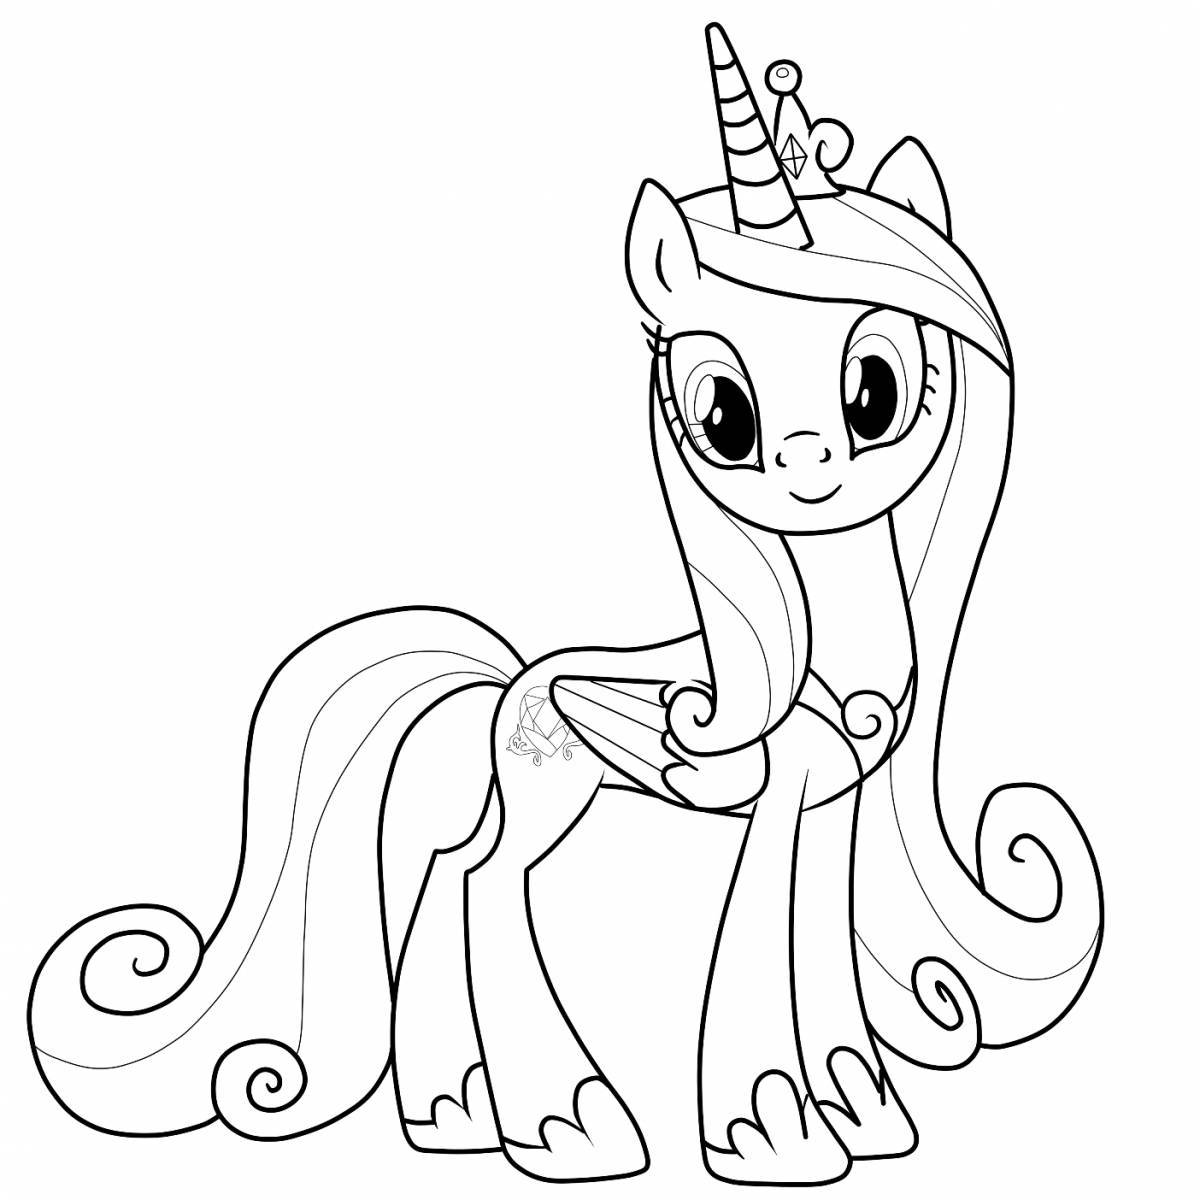 Adorable pony coloring pages